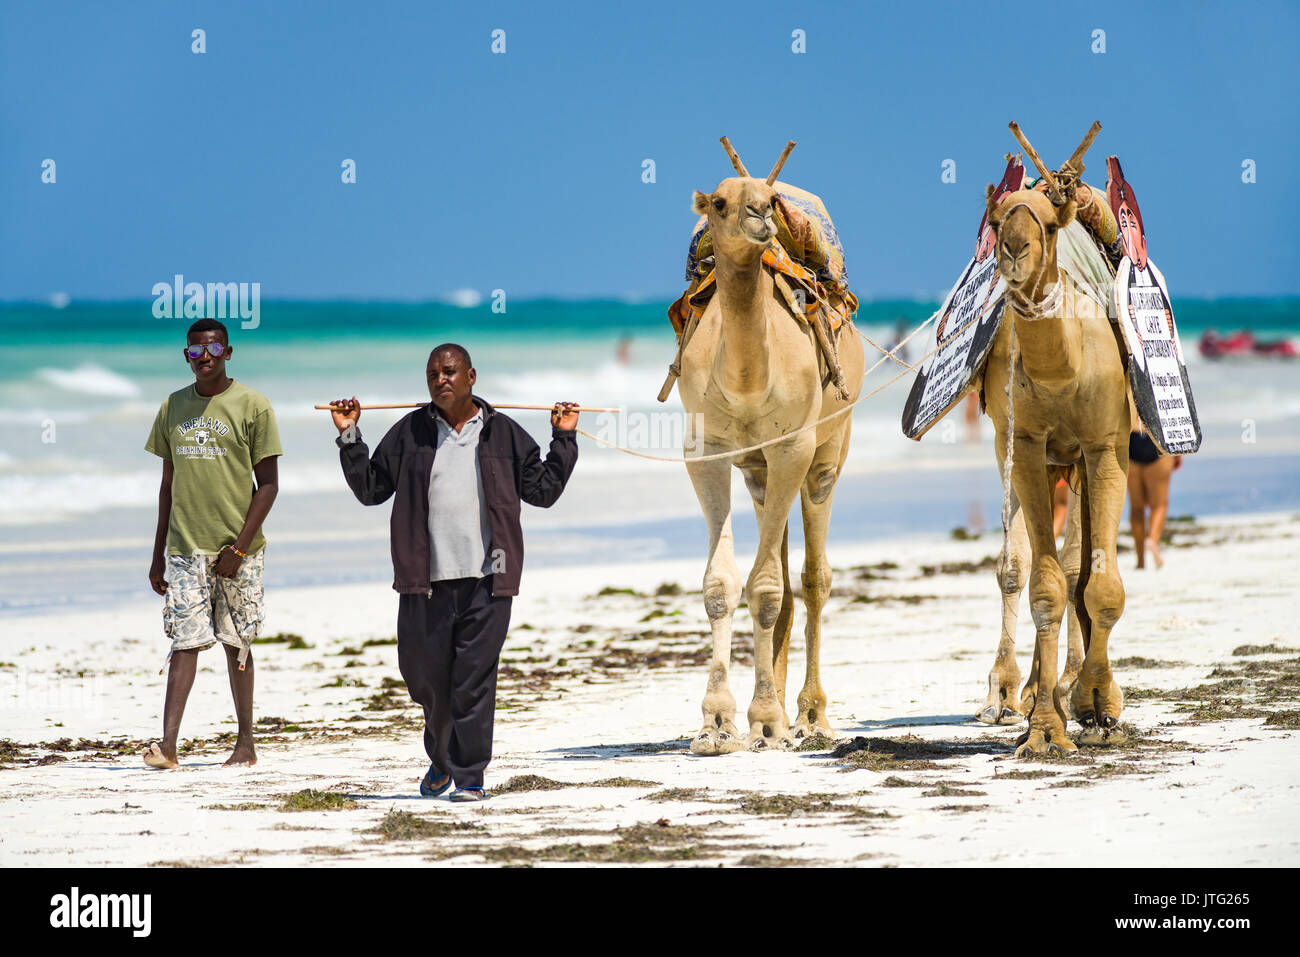 Two camels with owners walking along beach with ocean shore, Diani, Kenya Stock Photo